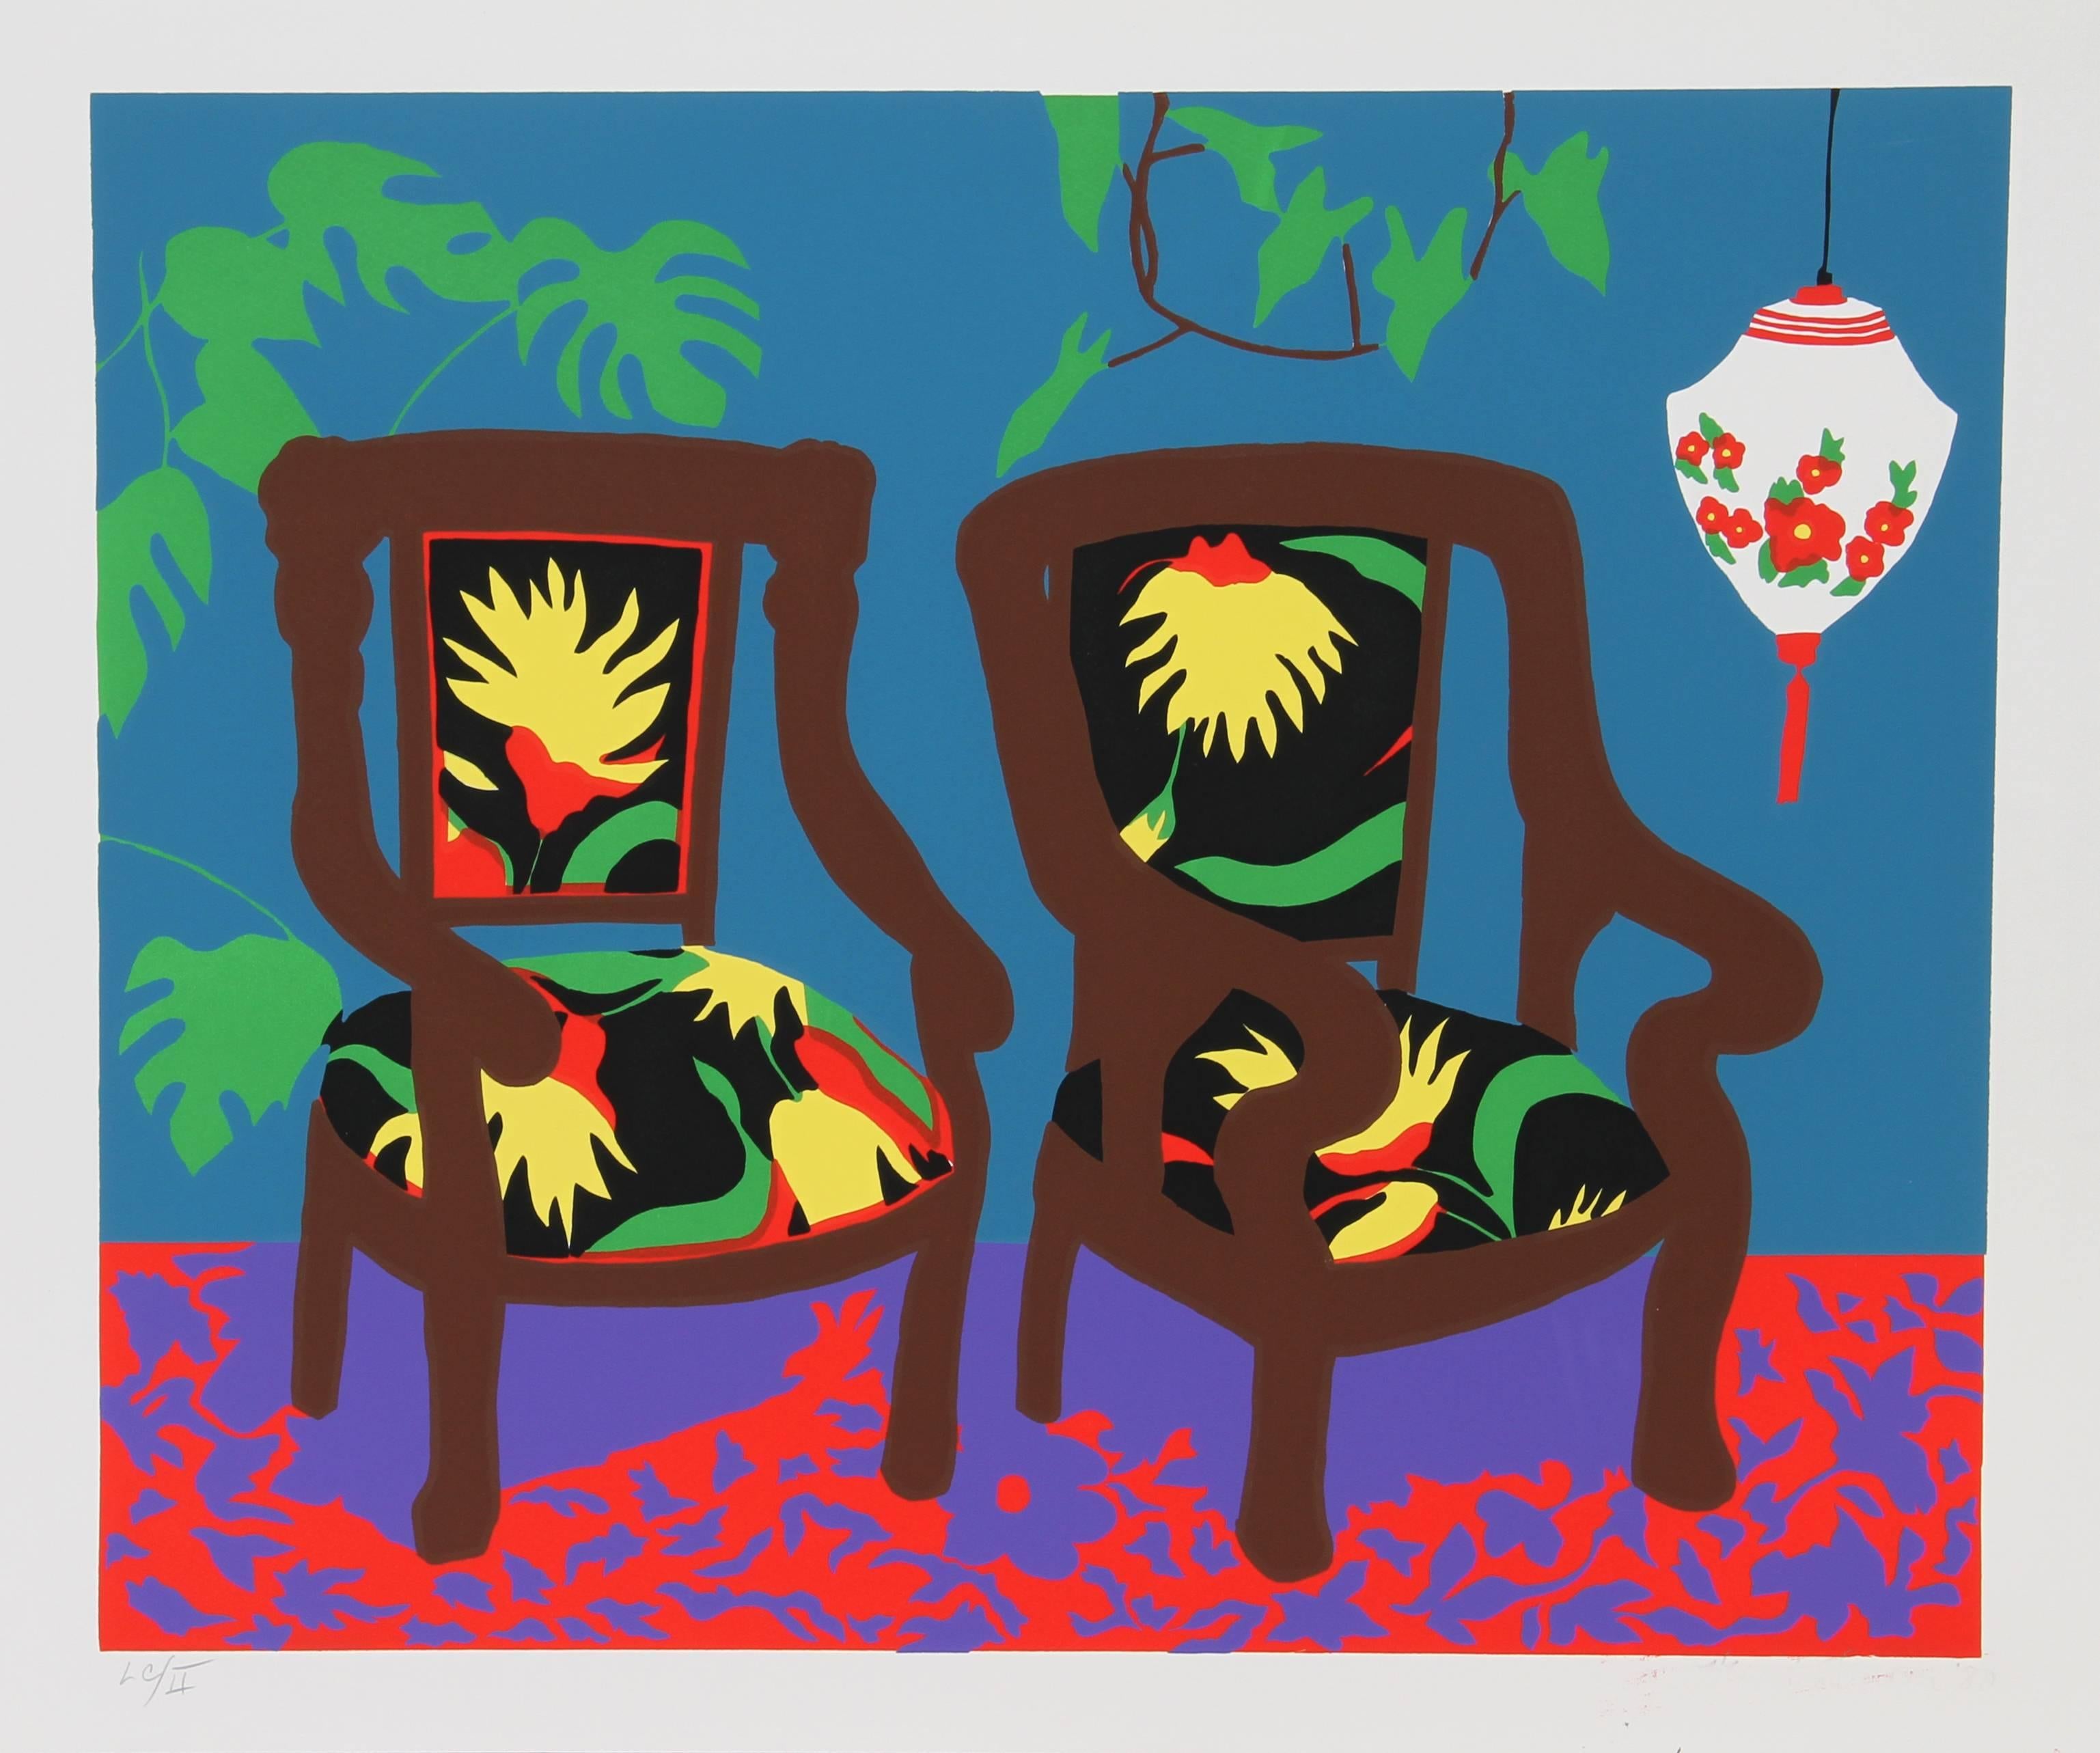 This serigraph was created by contemporary American artist Hunt Slonem. Slonem is best known for his Neo-Expressionist paintings and bright tropical palette, and his subject matter often includes tropical birds, based on a personal aviary in which